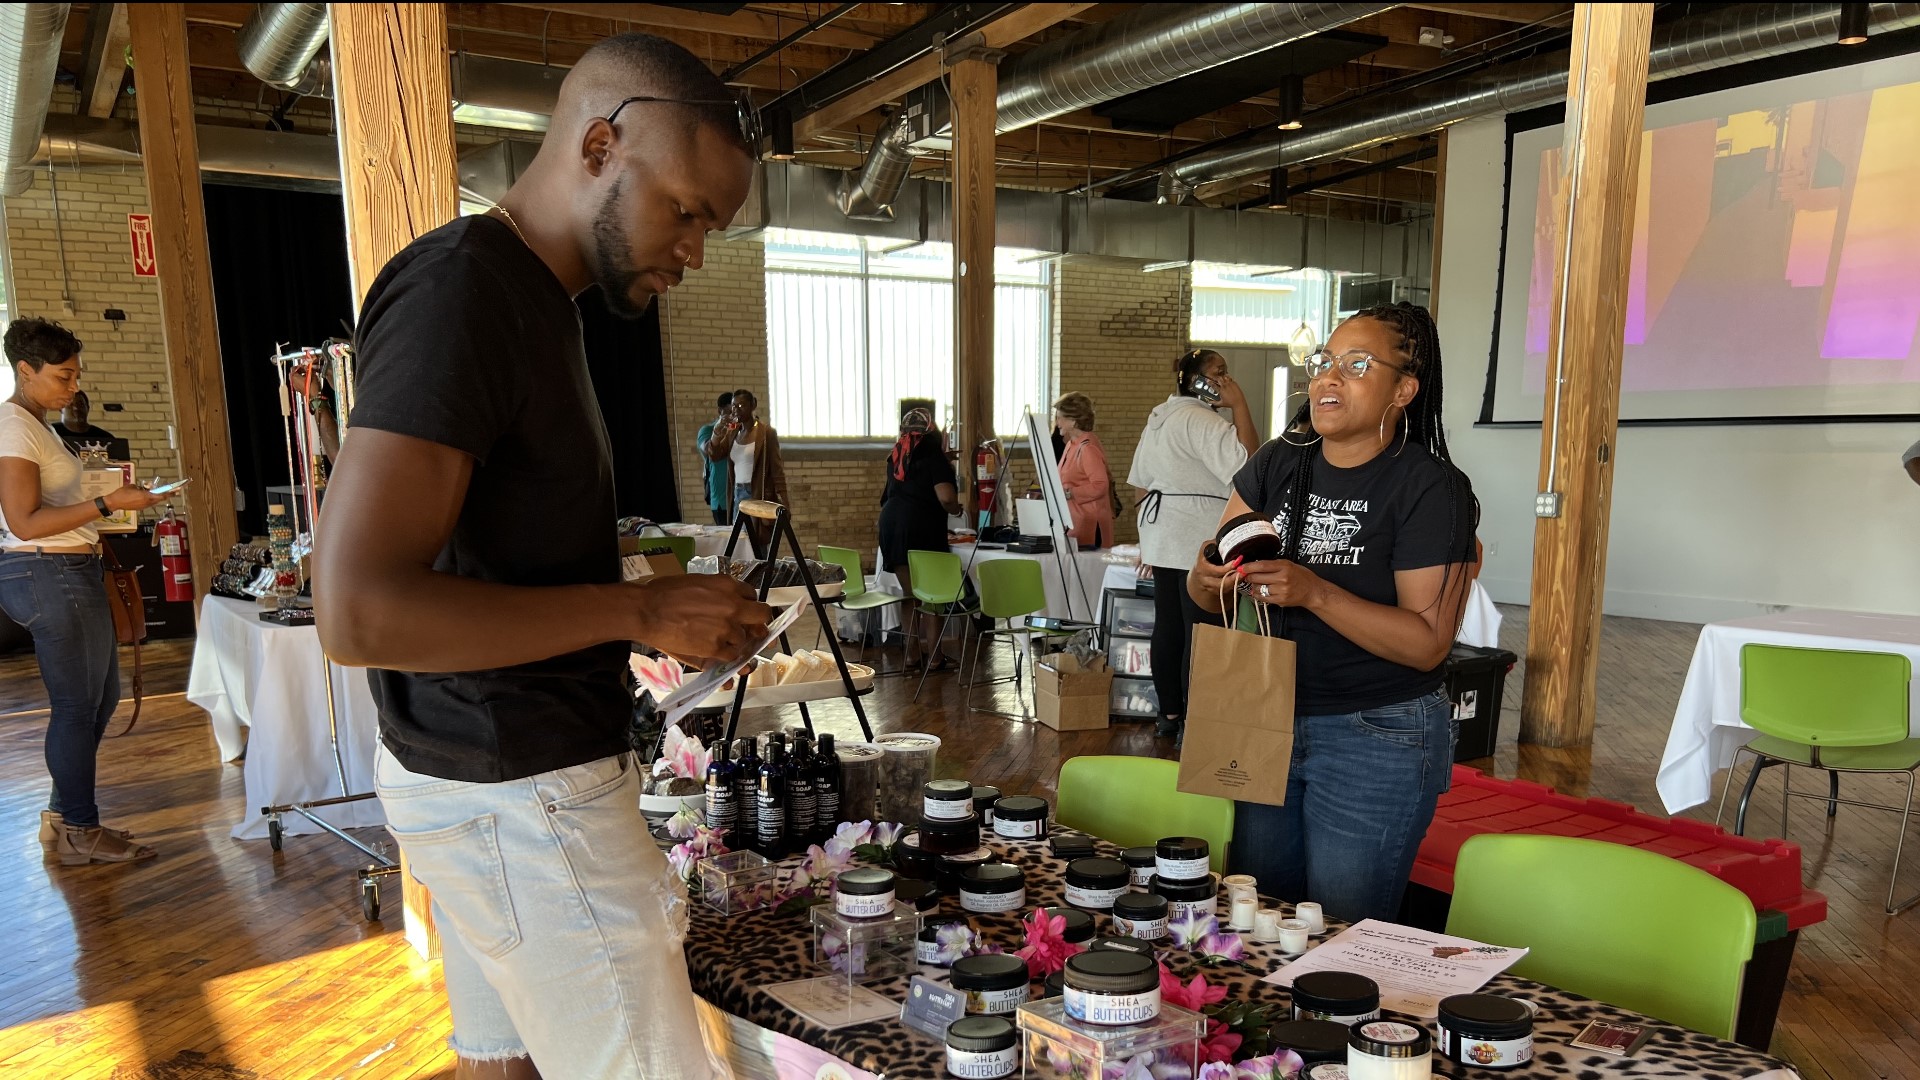 The Center for Community Transformation hosted several Black-owned businesses Thursday, giving consumers a chance to shop small and local.